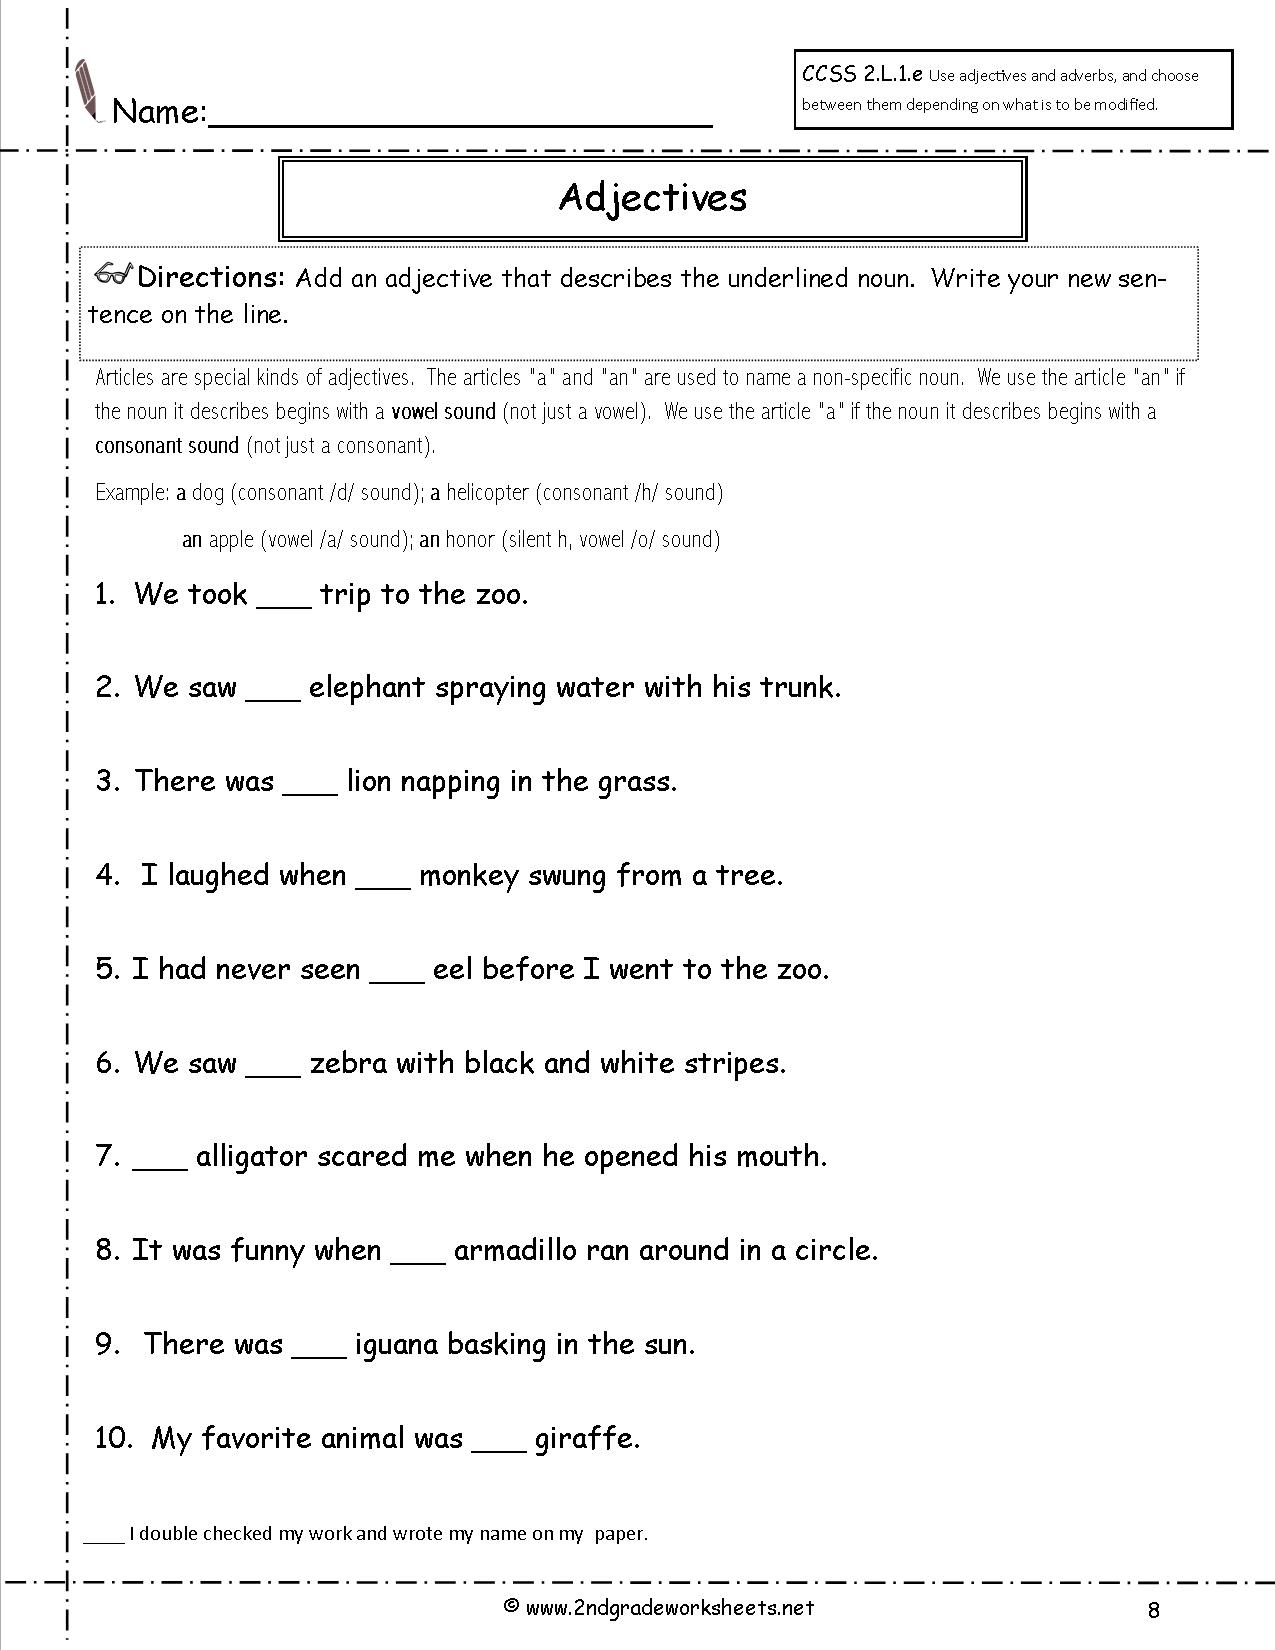 adjective worksheets for grade 7 with answers